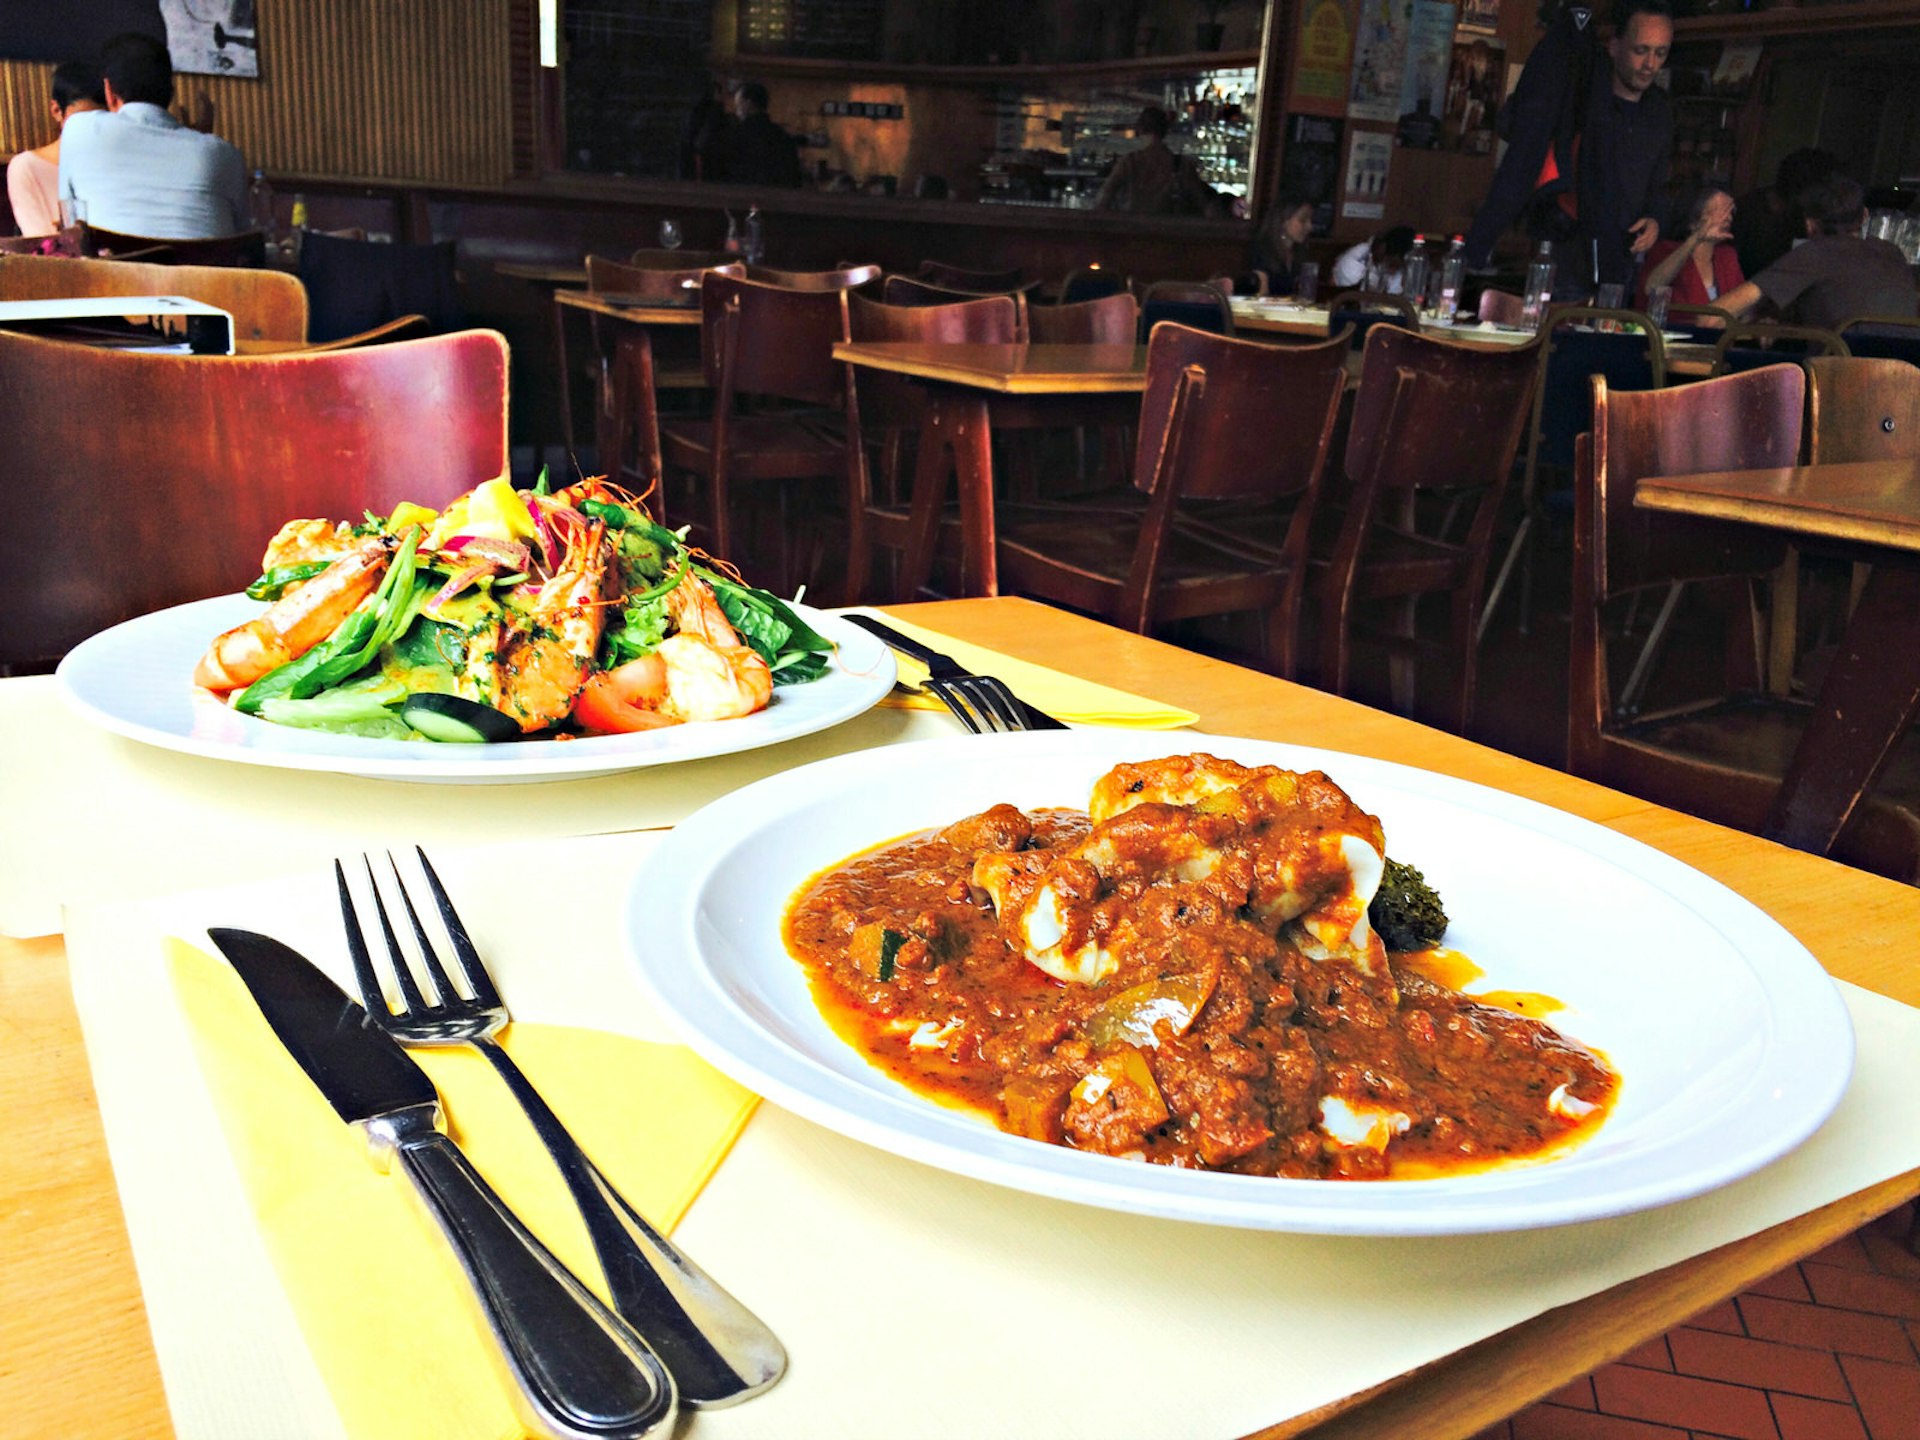 Horloge du Sud offers a taste of Central Africa in Brussels © Charlotte McDonald-Gibson/Lonely Planet